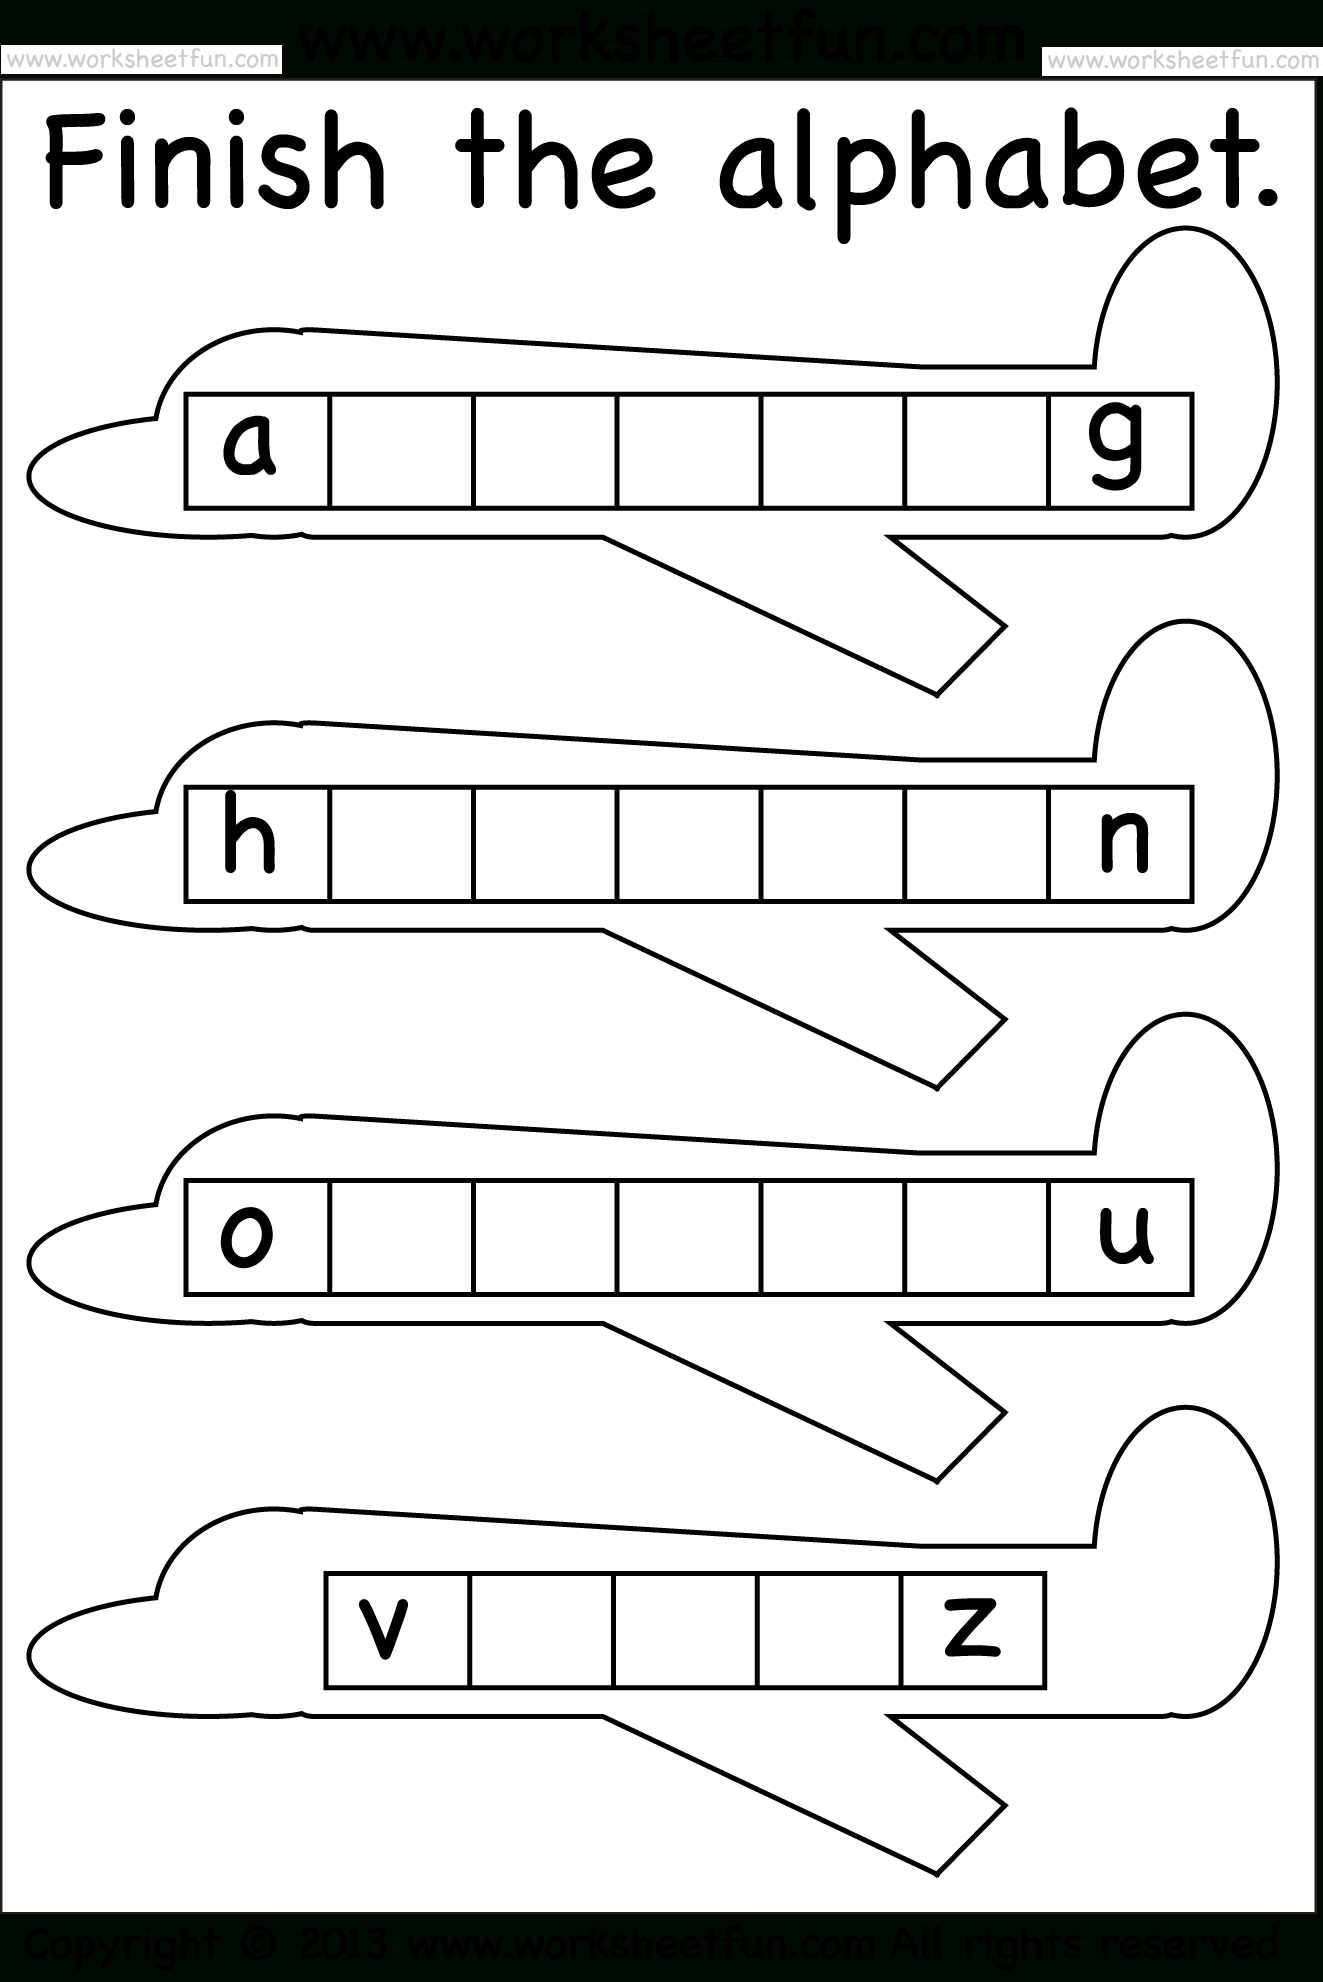 Missing Lowercase Letters – Missing Small Letters for Pre K Alphabet Review Worksheets